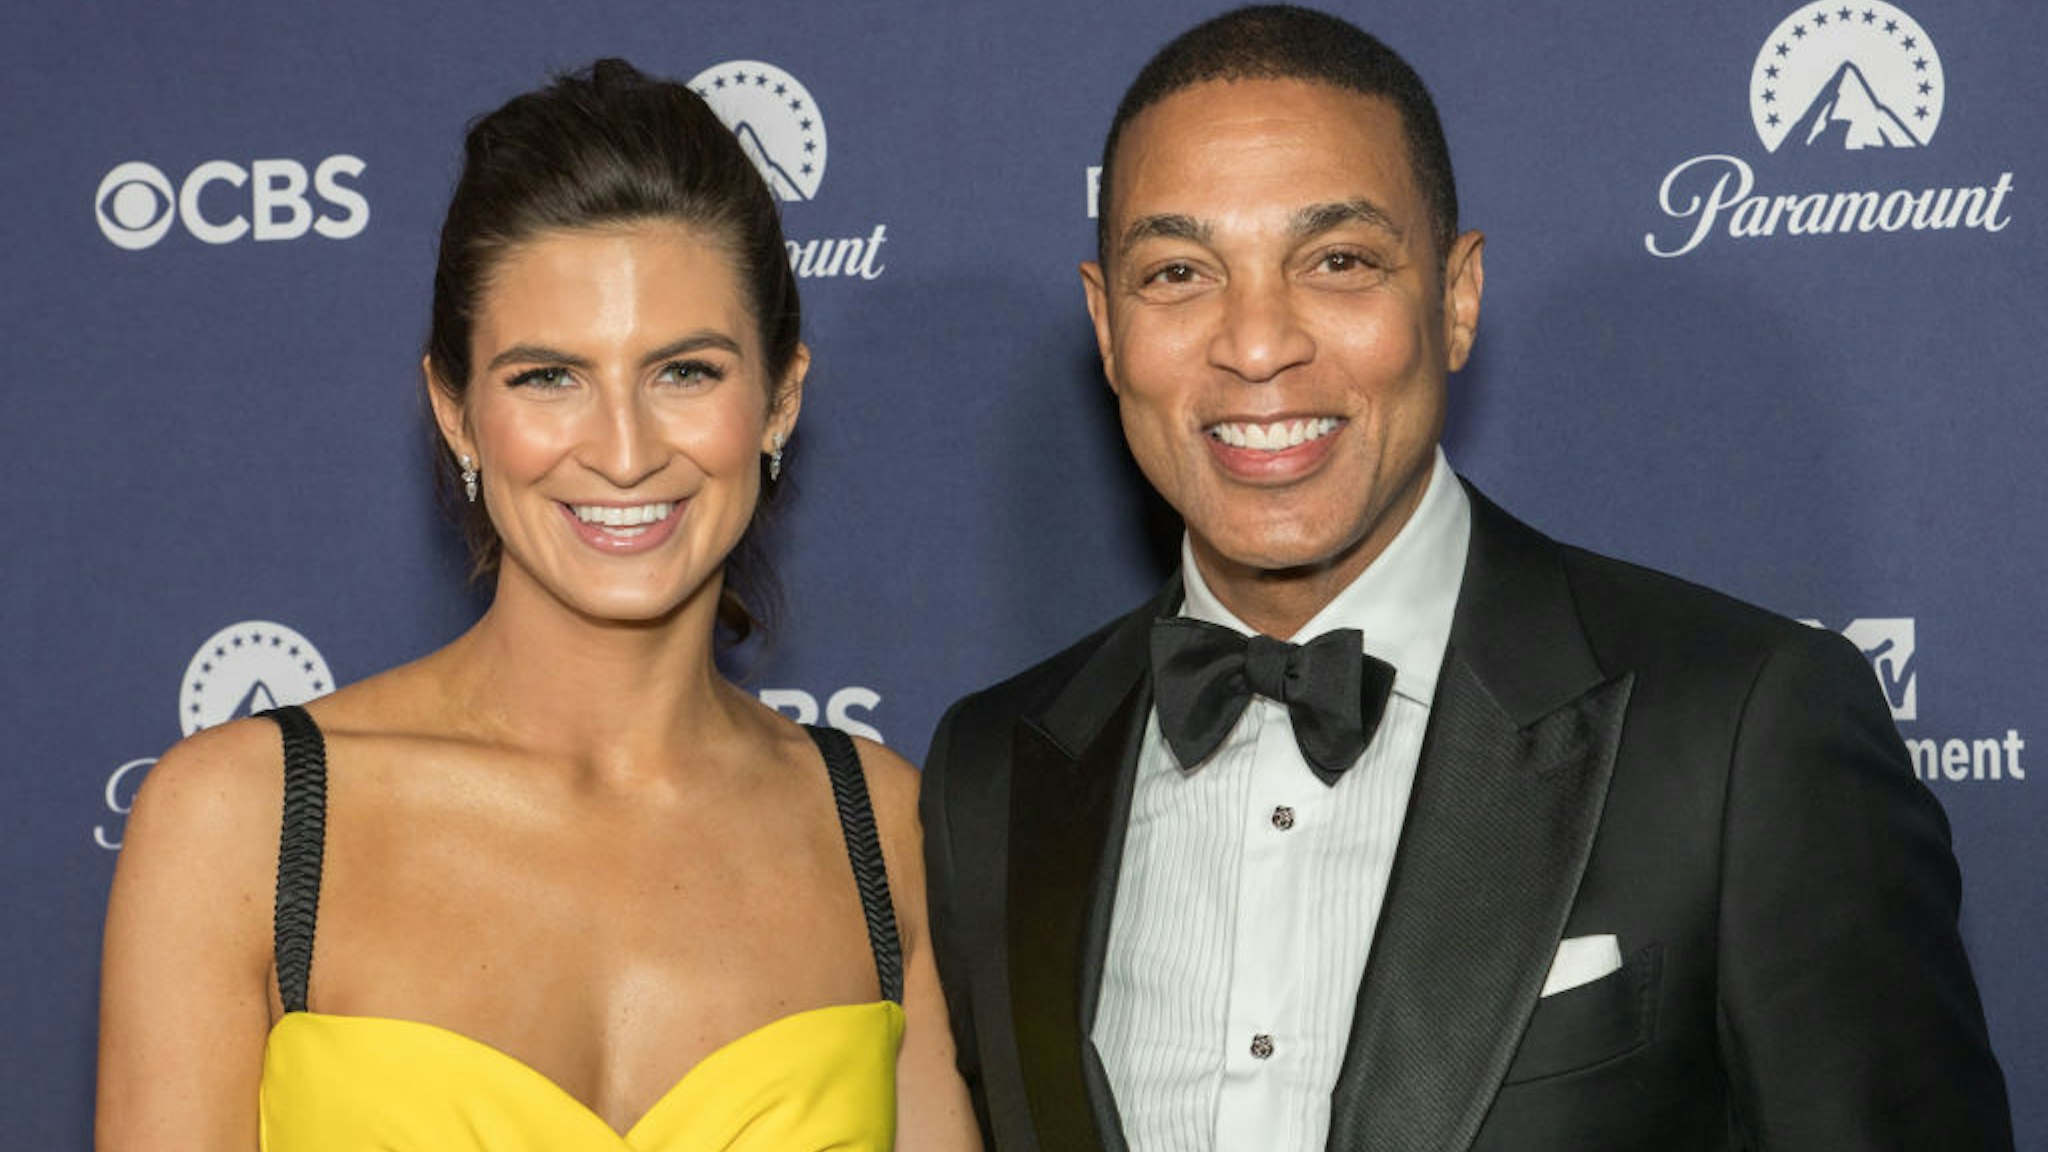 WASHINGTON, DC - APRIL 30: (L-R) Kaitlan Collins and Don Lemon attend Paramount’s White House Correspondents’ Dinner after party at the Residence of the French Ambassador on April 30, 2022 in Washington, DC. (Photo by Shedrick Pelt/Getty Images)